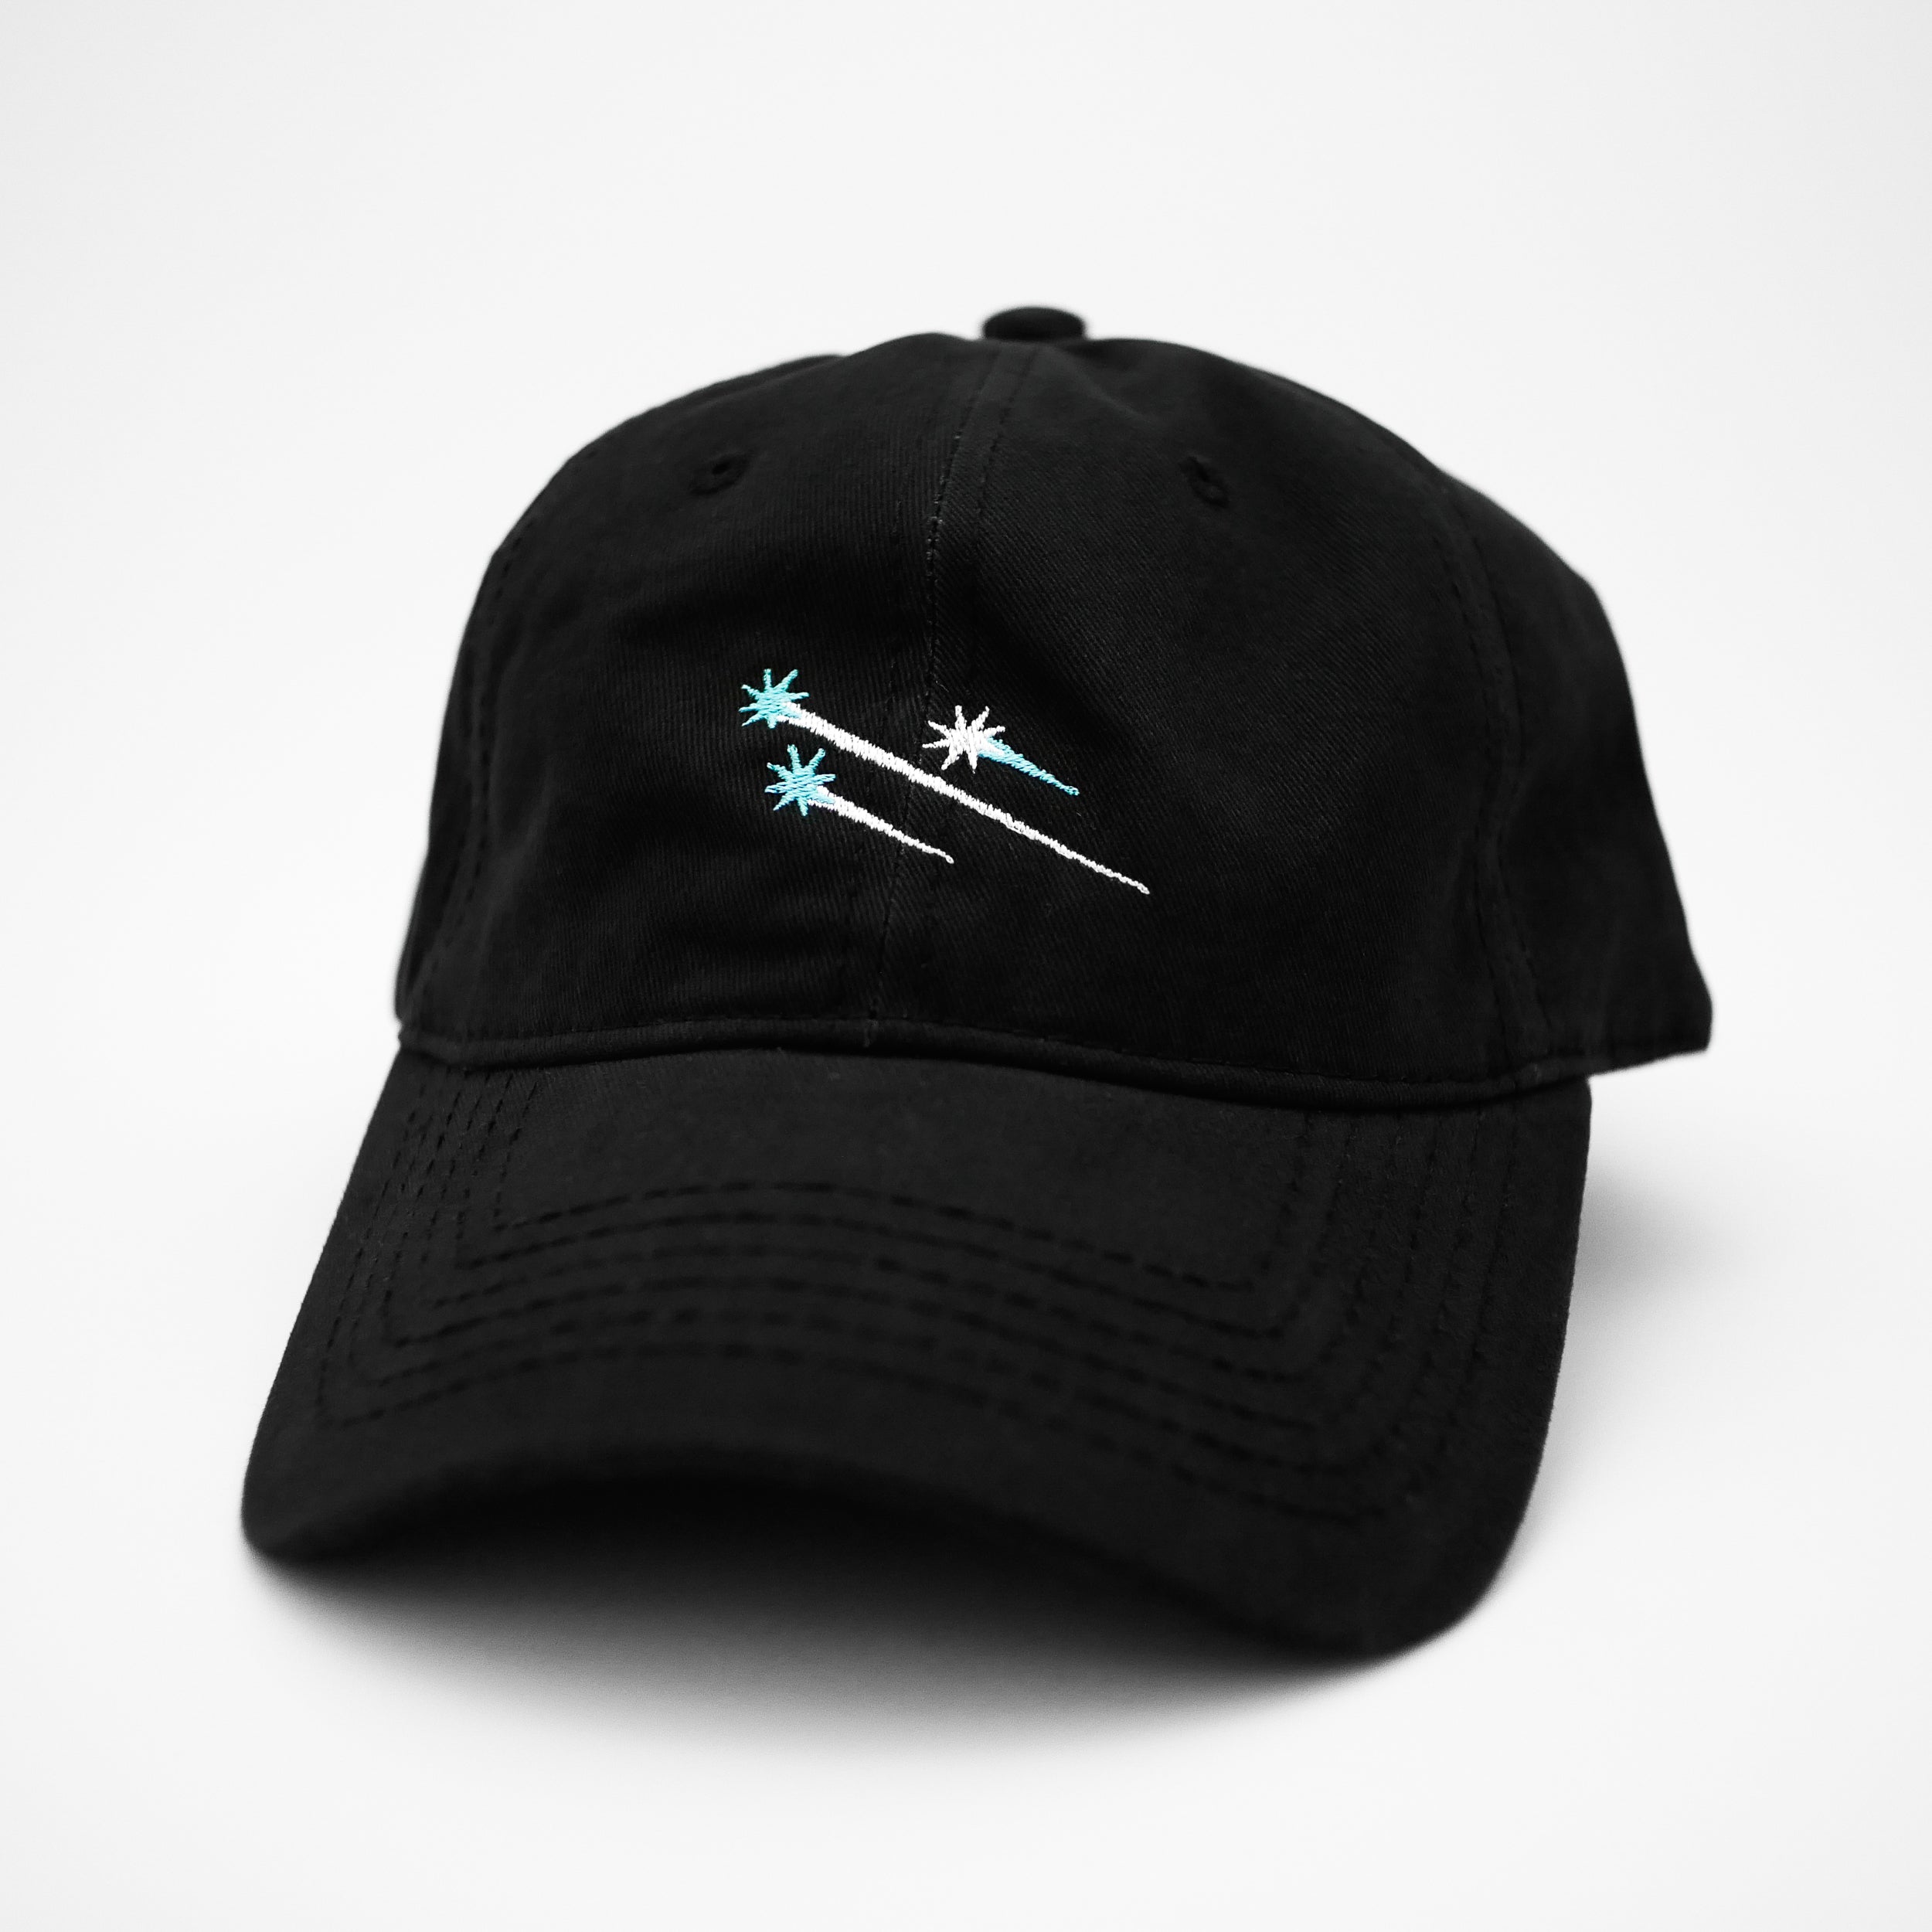 Angle view of the embroidered ÉTOILE black dad hat from PHOSIS® Clothing